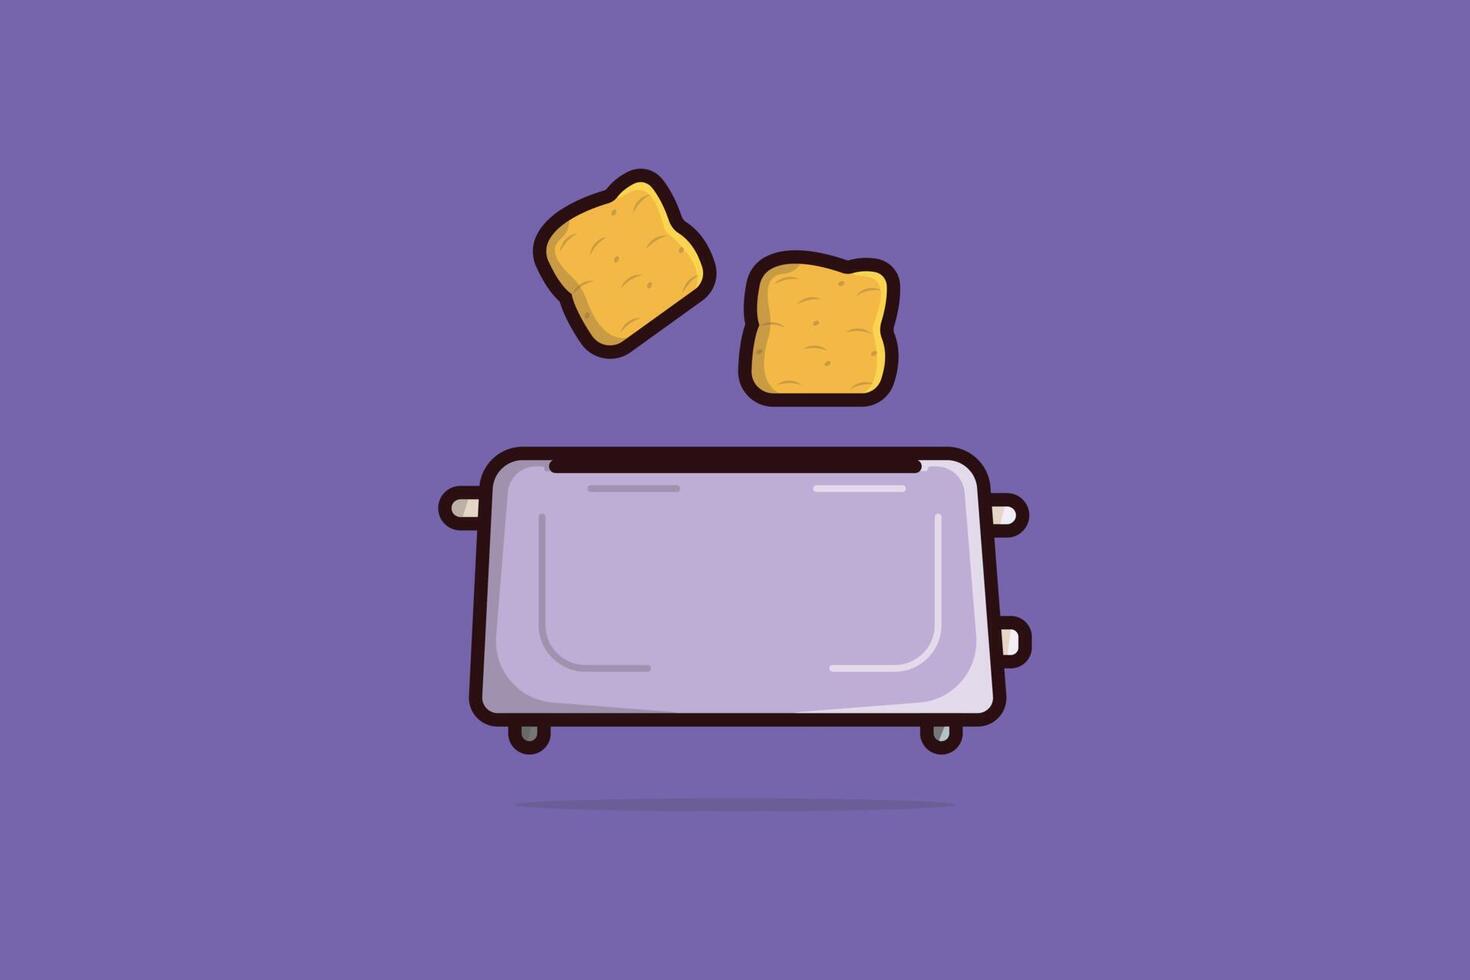 Two Fried Bread Pieces In Toaster vector illustration. Break fast food technology object icon concept. Home Toaster fried bread slices prepared for a breakfast vector design with shadow.